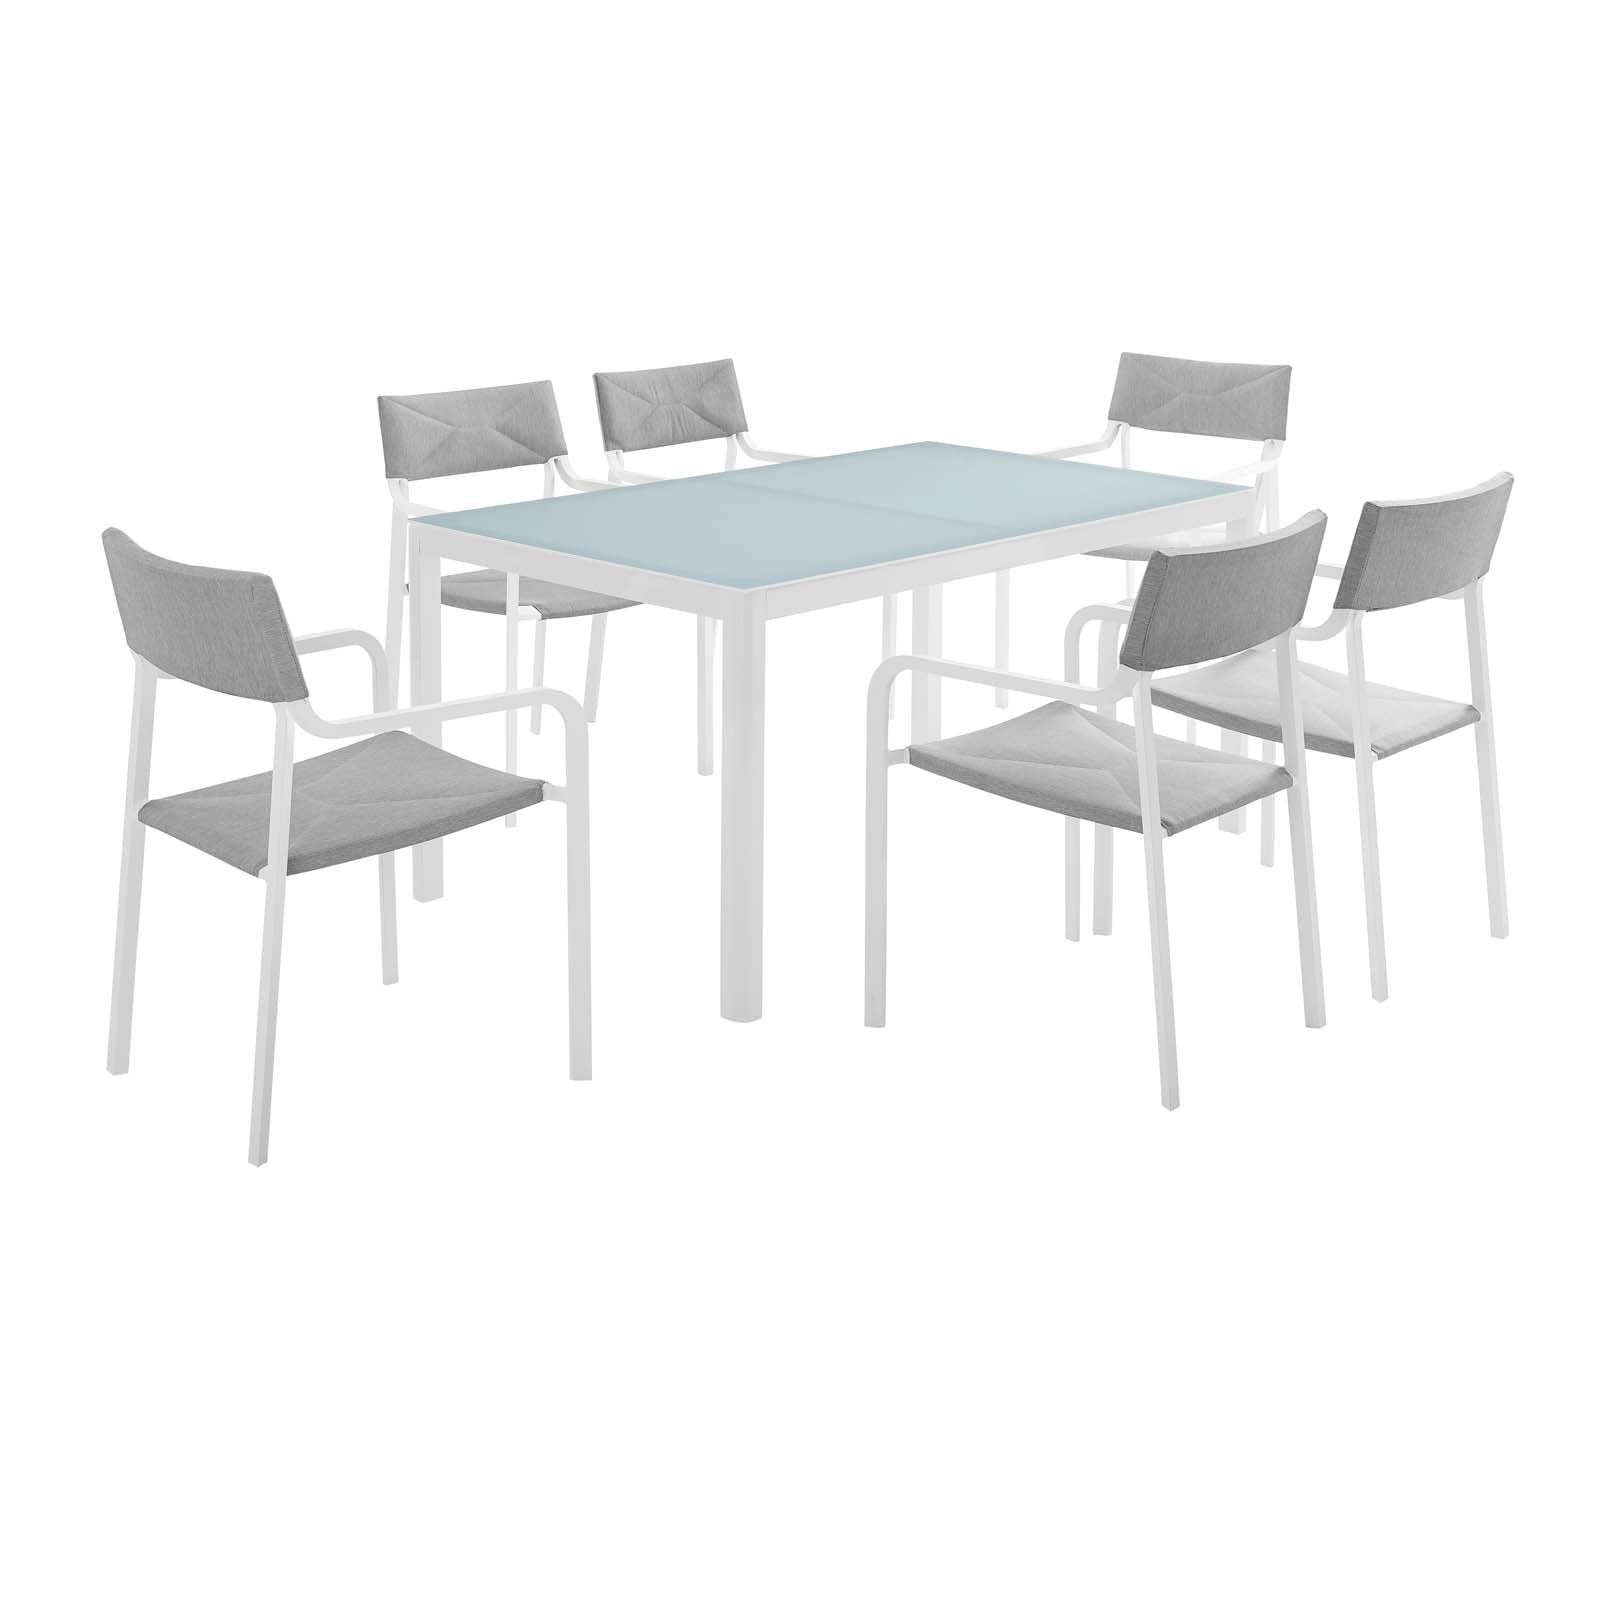 Raleigh 7 Piece Outdoor Patio Aluminum Dining Set - East Shore Modern Home Furnishings